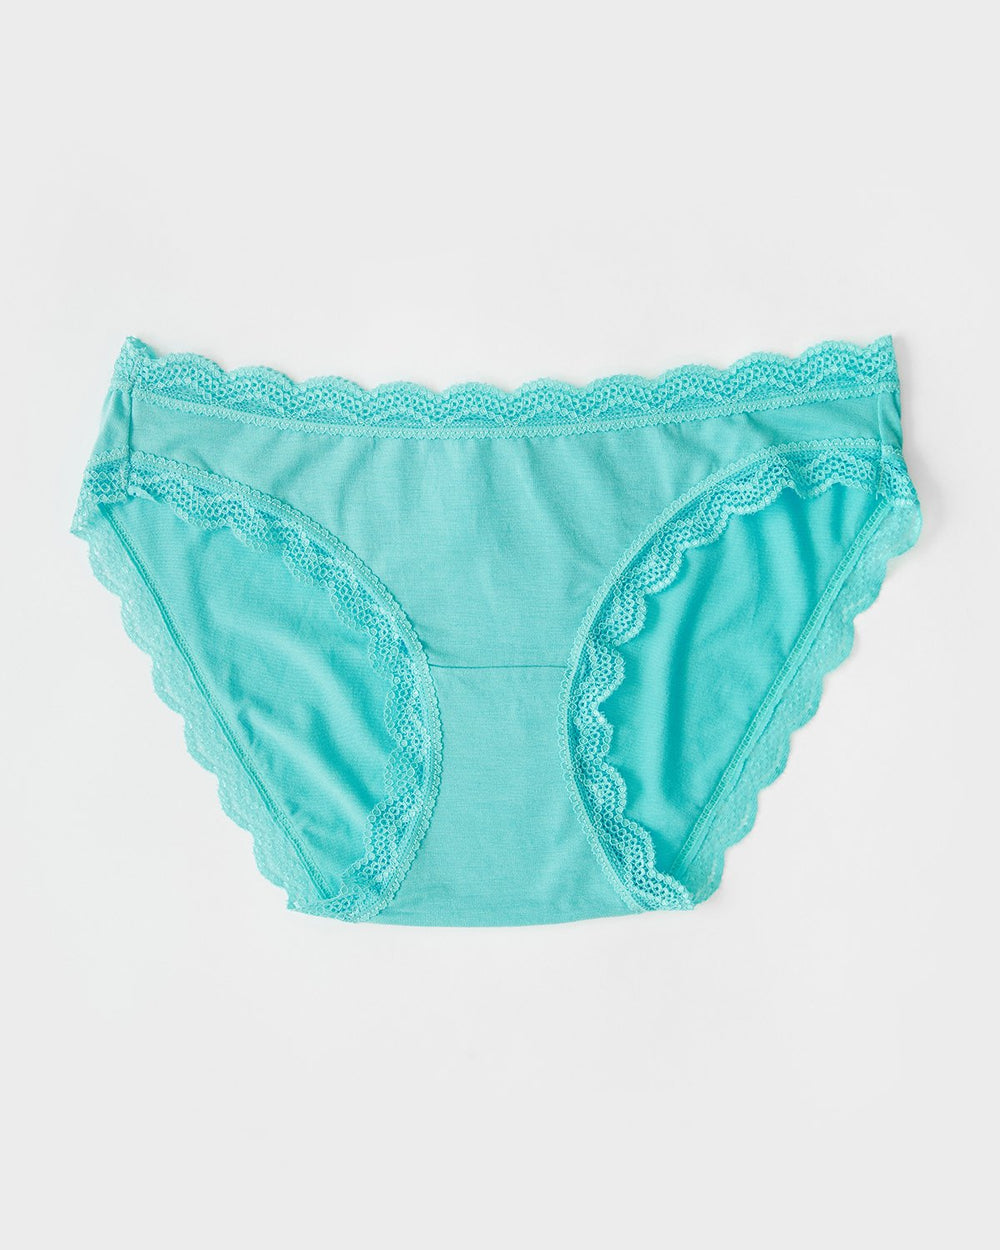 Amore Panty in Teal, Sexy Teal Hipster, Hipster Panties, Gift for